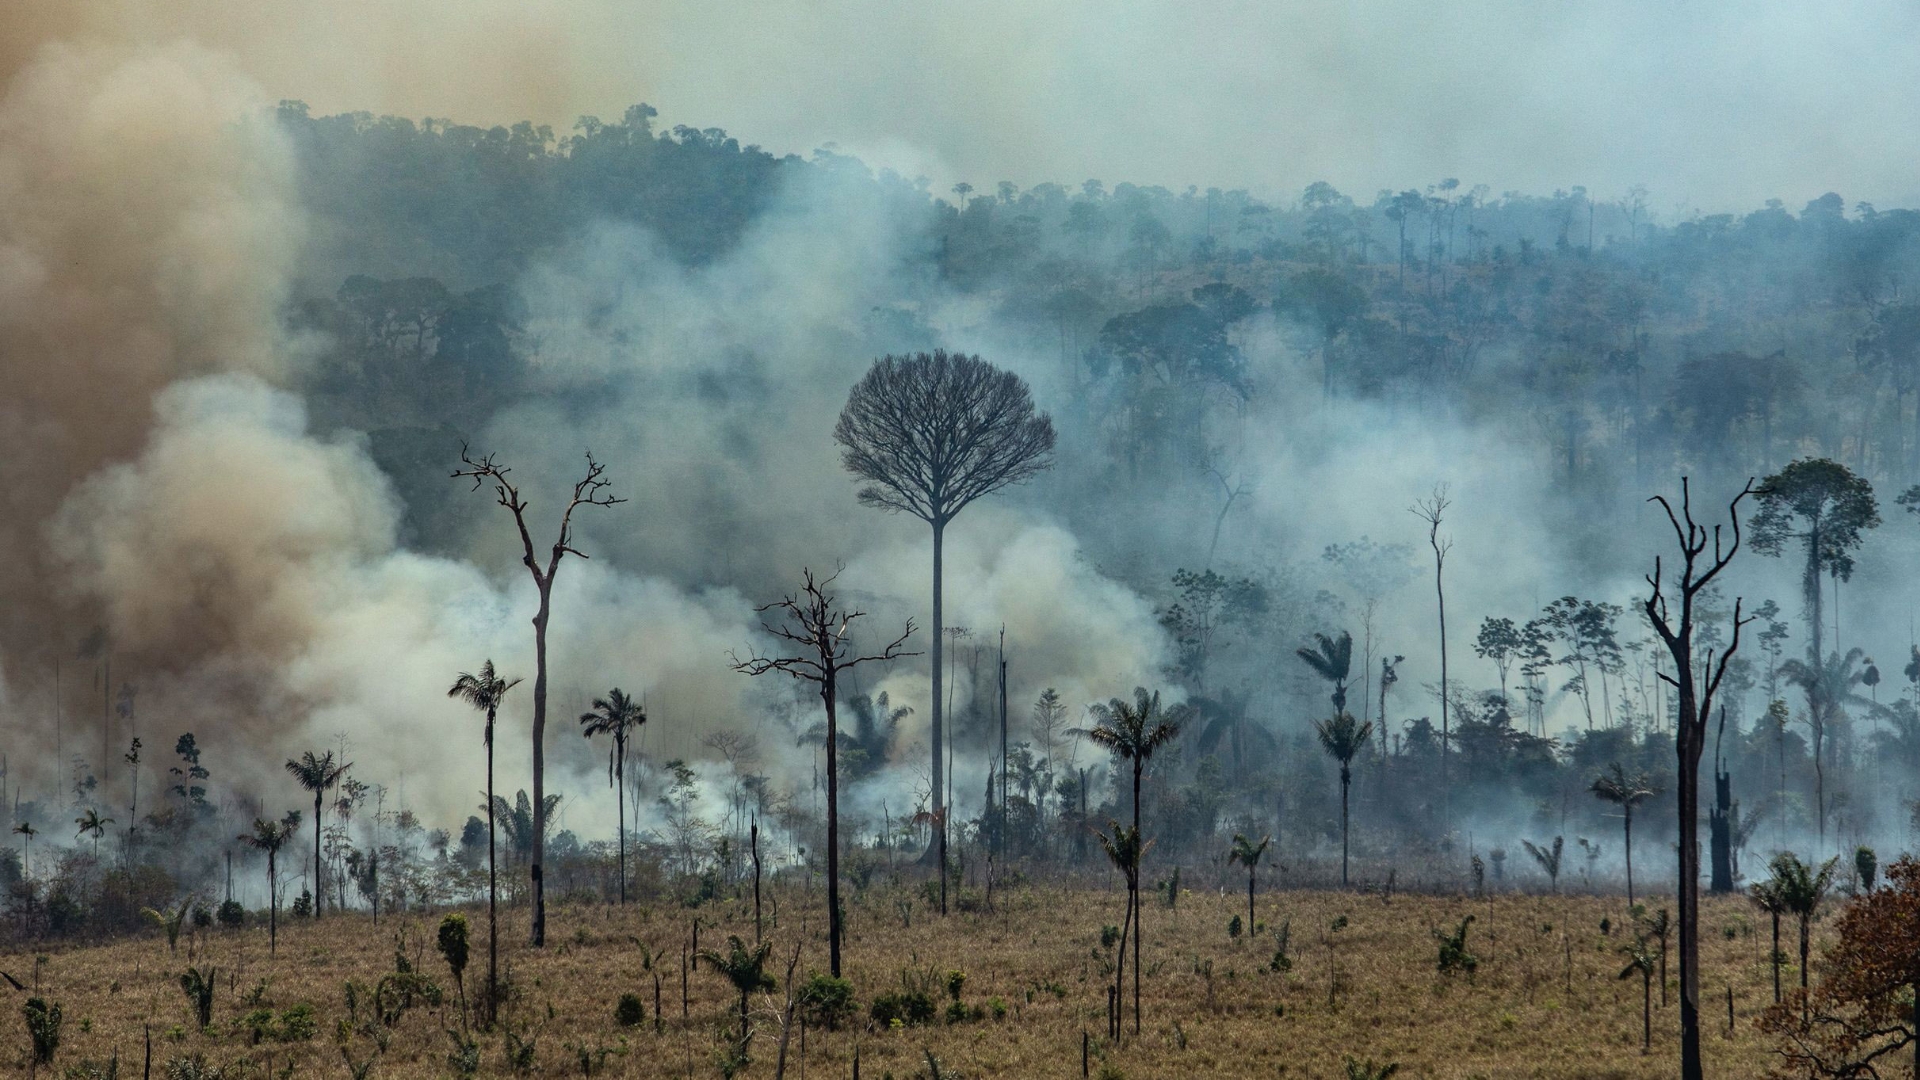 Amazon rainforest fires: What you need to know - The Washington Post